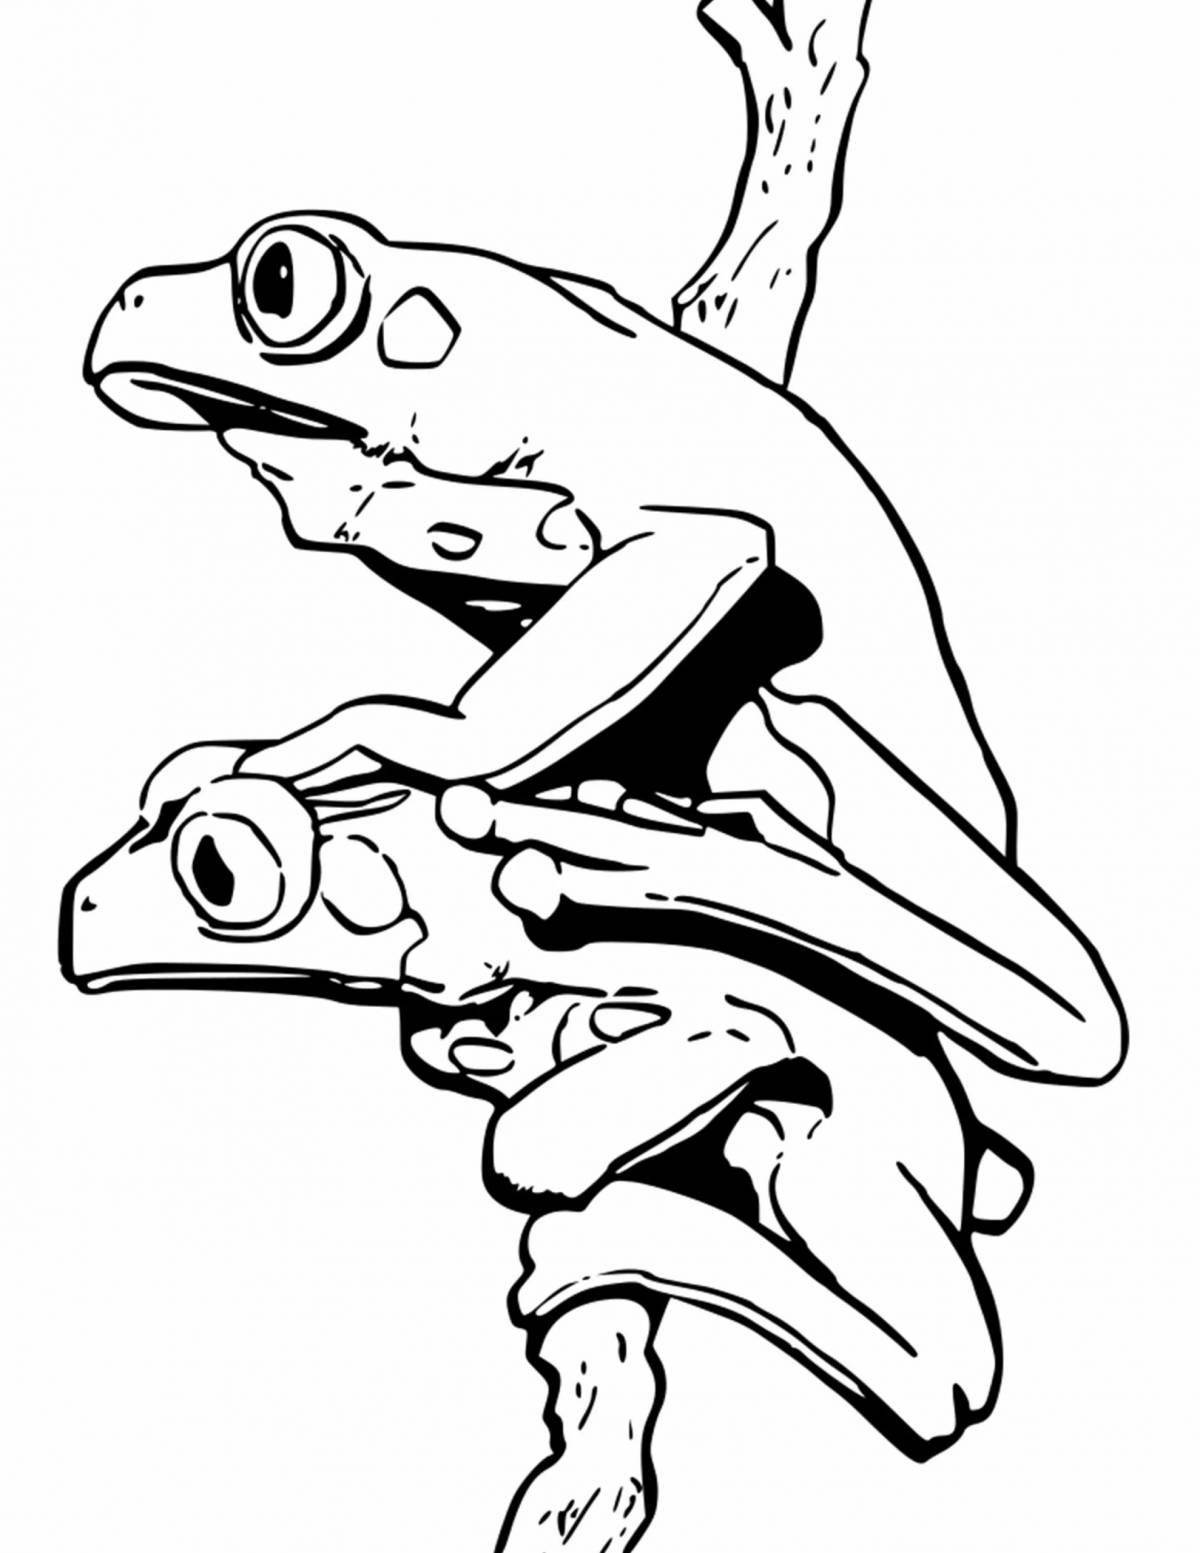 Coloring book funny tree frog